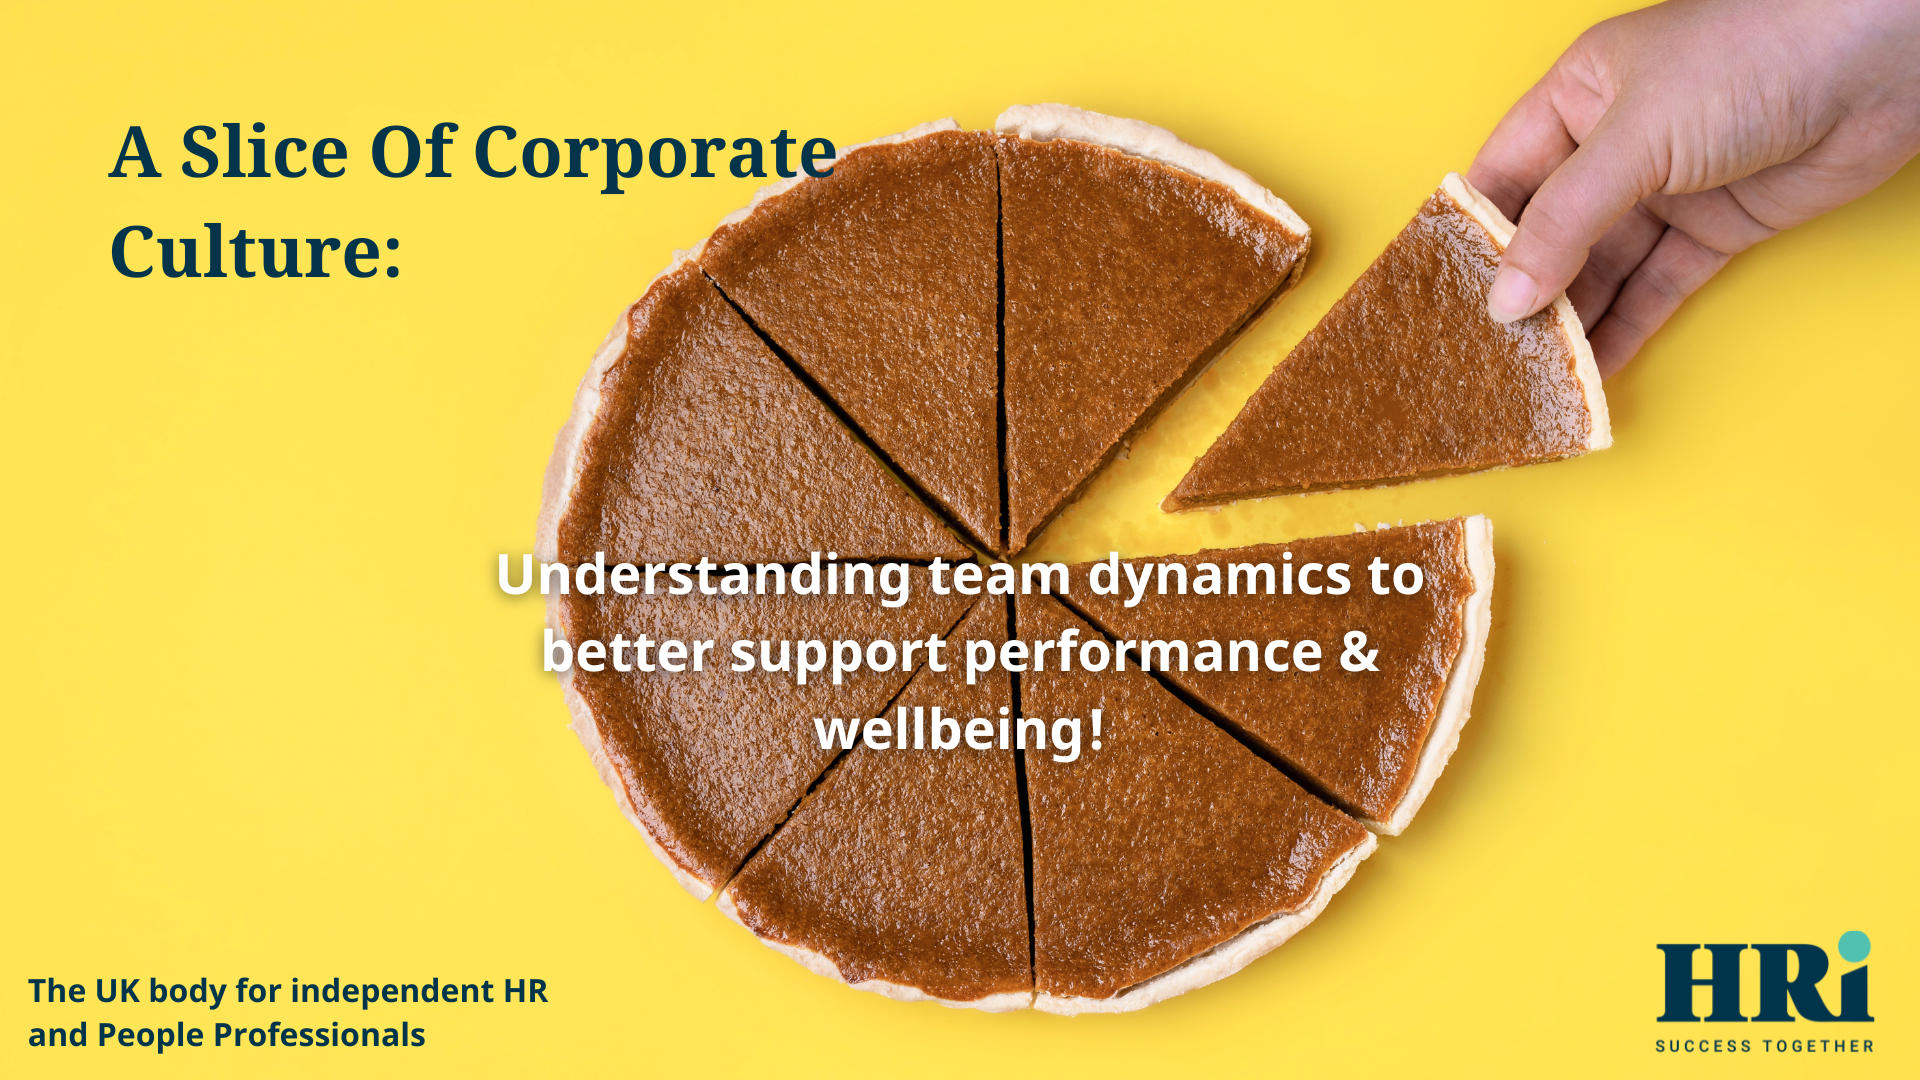 Slice of Corporate Culture, understanding team dynamics | image of a cake with a slice